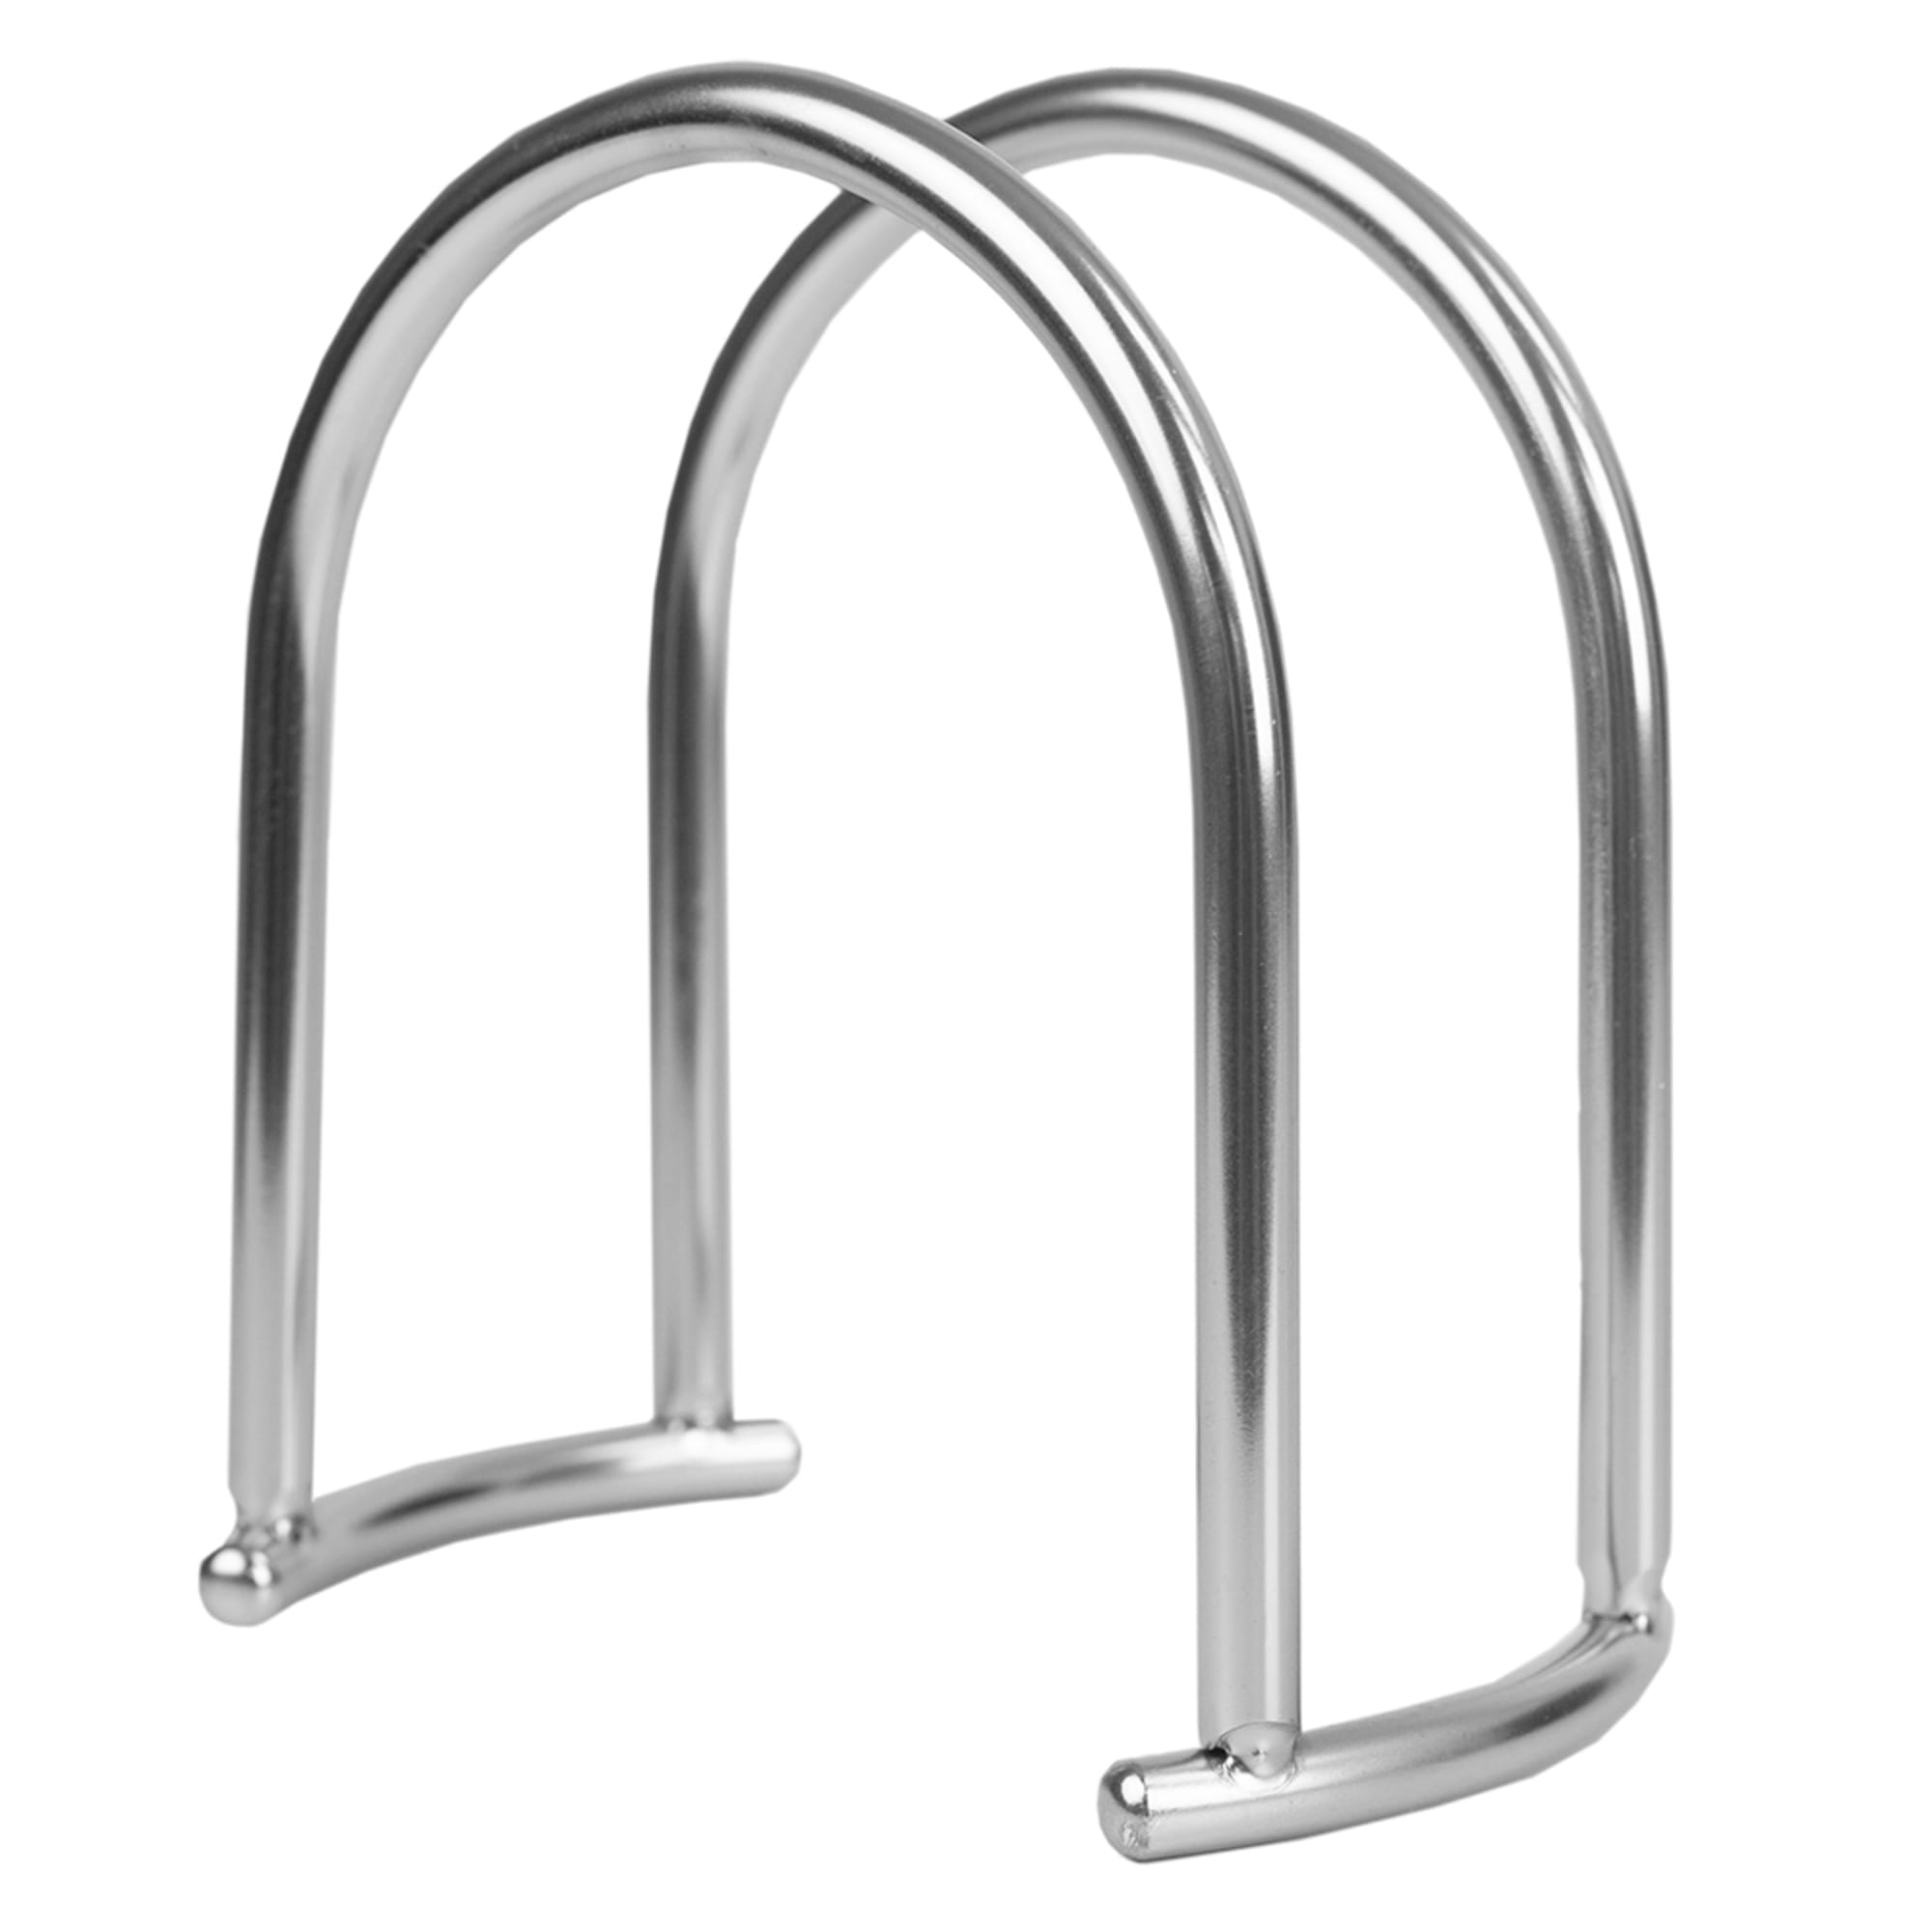 Home Basics Simplicity Collection Napkin Holder, Satin Chrome $4.00 EACH, CASE PACK OF 12